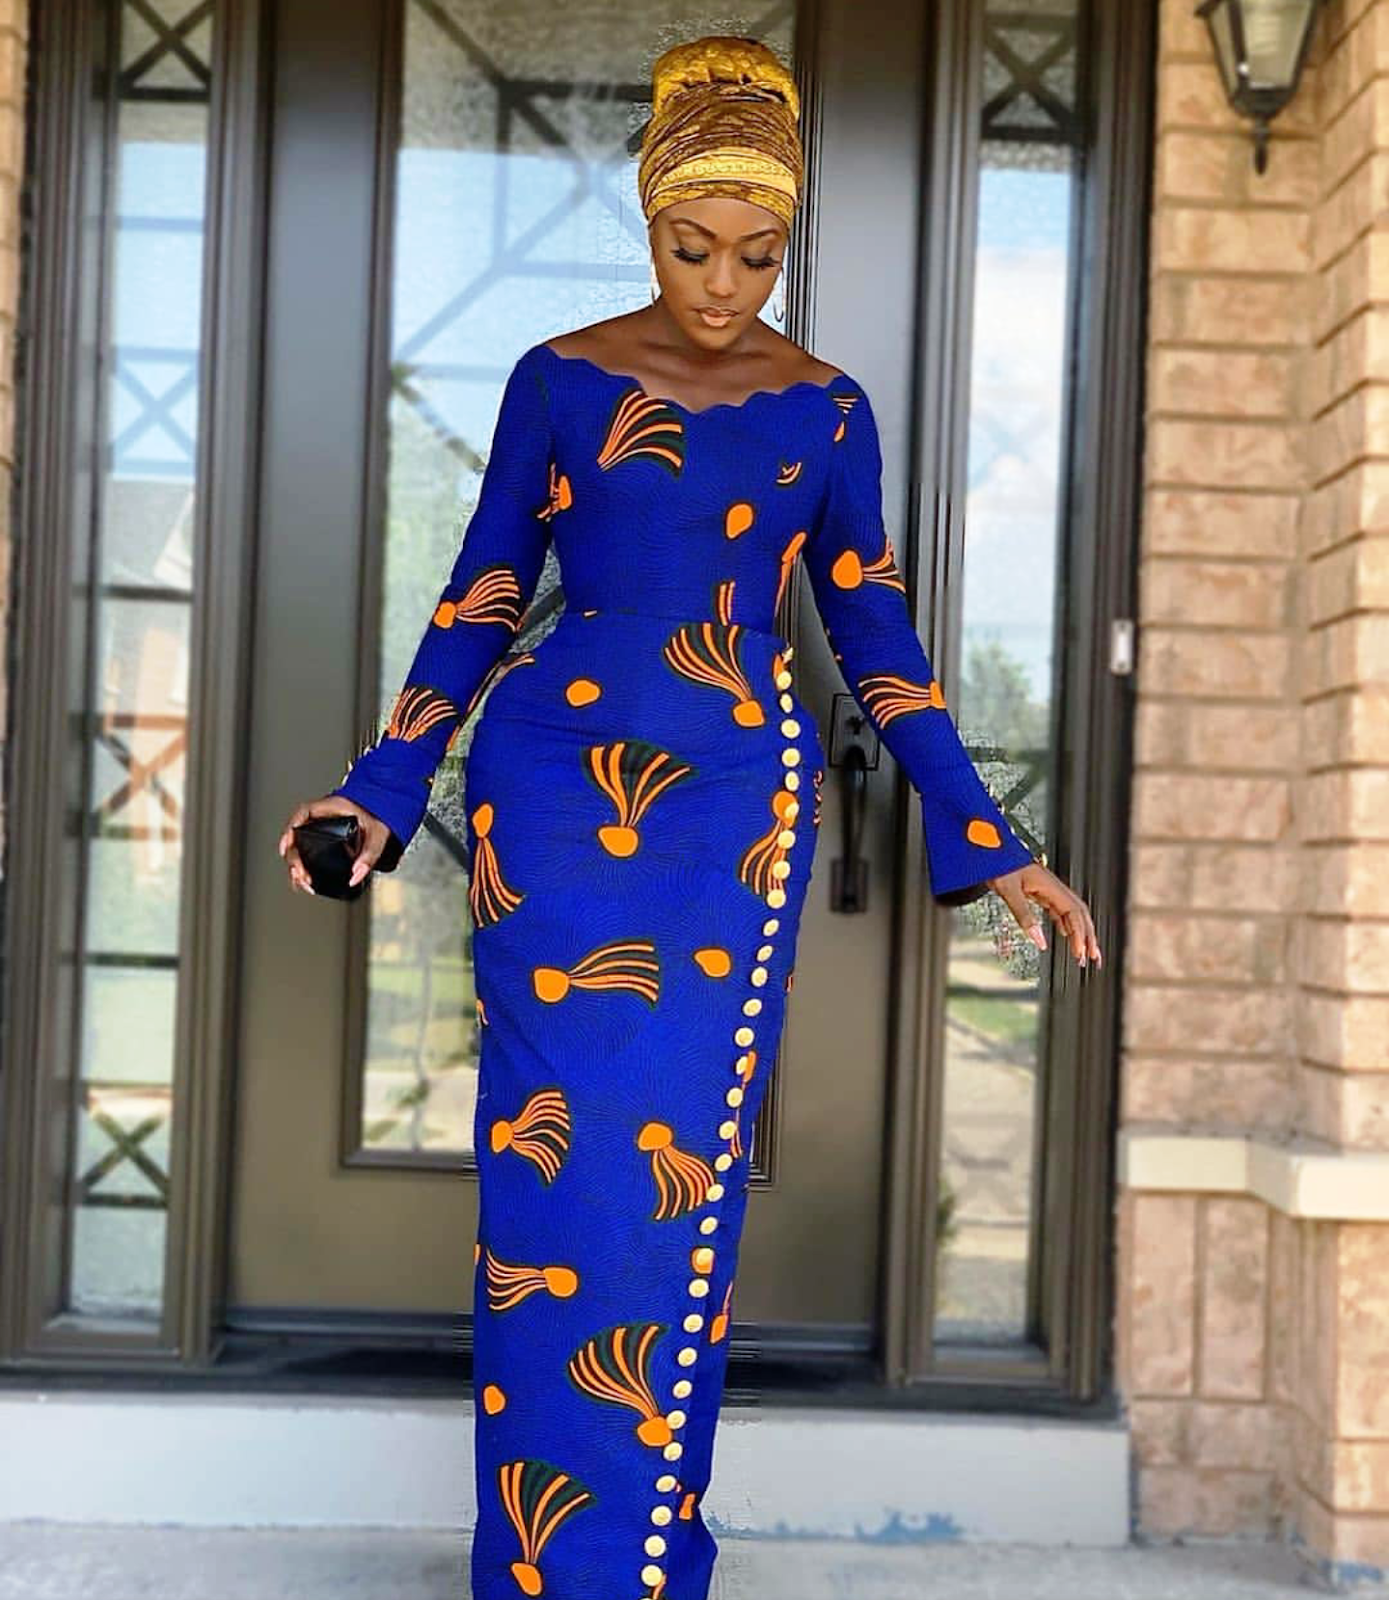 Best Ankara Dresses 2019 for Ladies: Top 10 Gorgeous Designs to slay